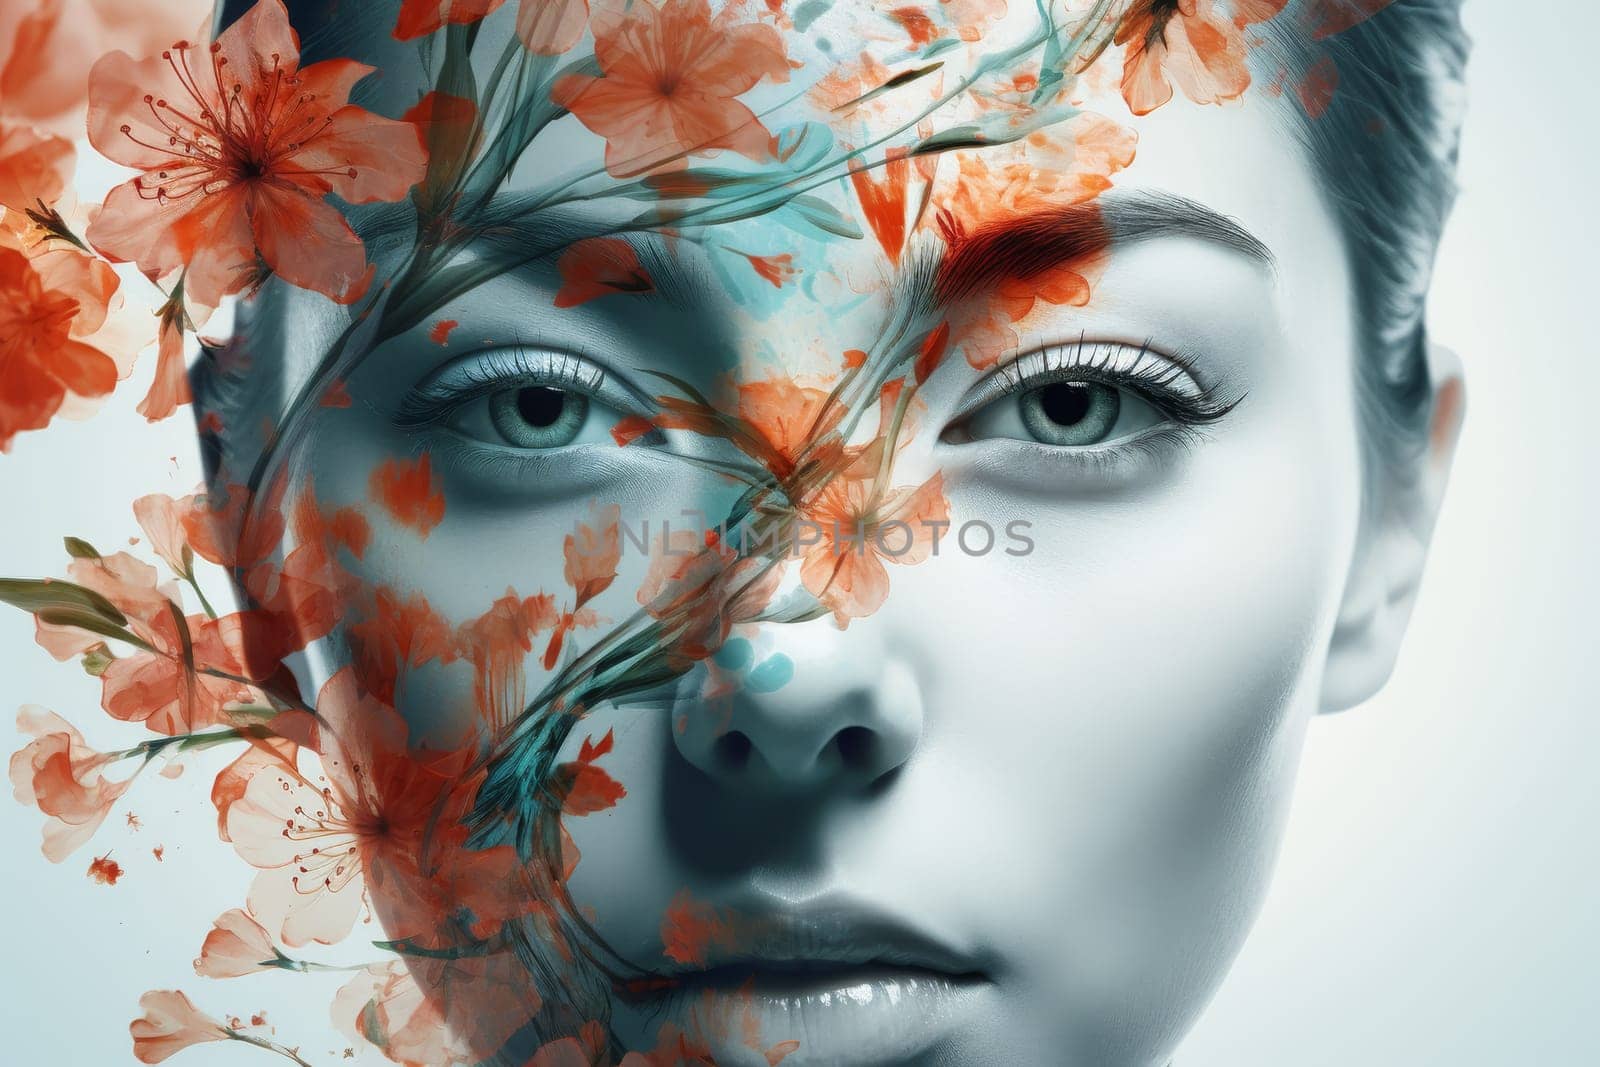 Double exposure portrait of a beautiful woman with bright spring flowers superimposed on her face